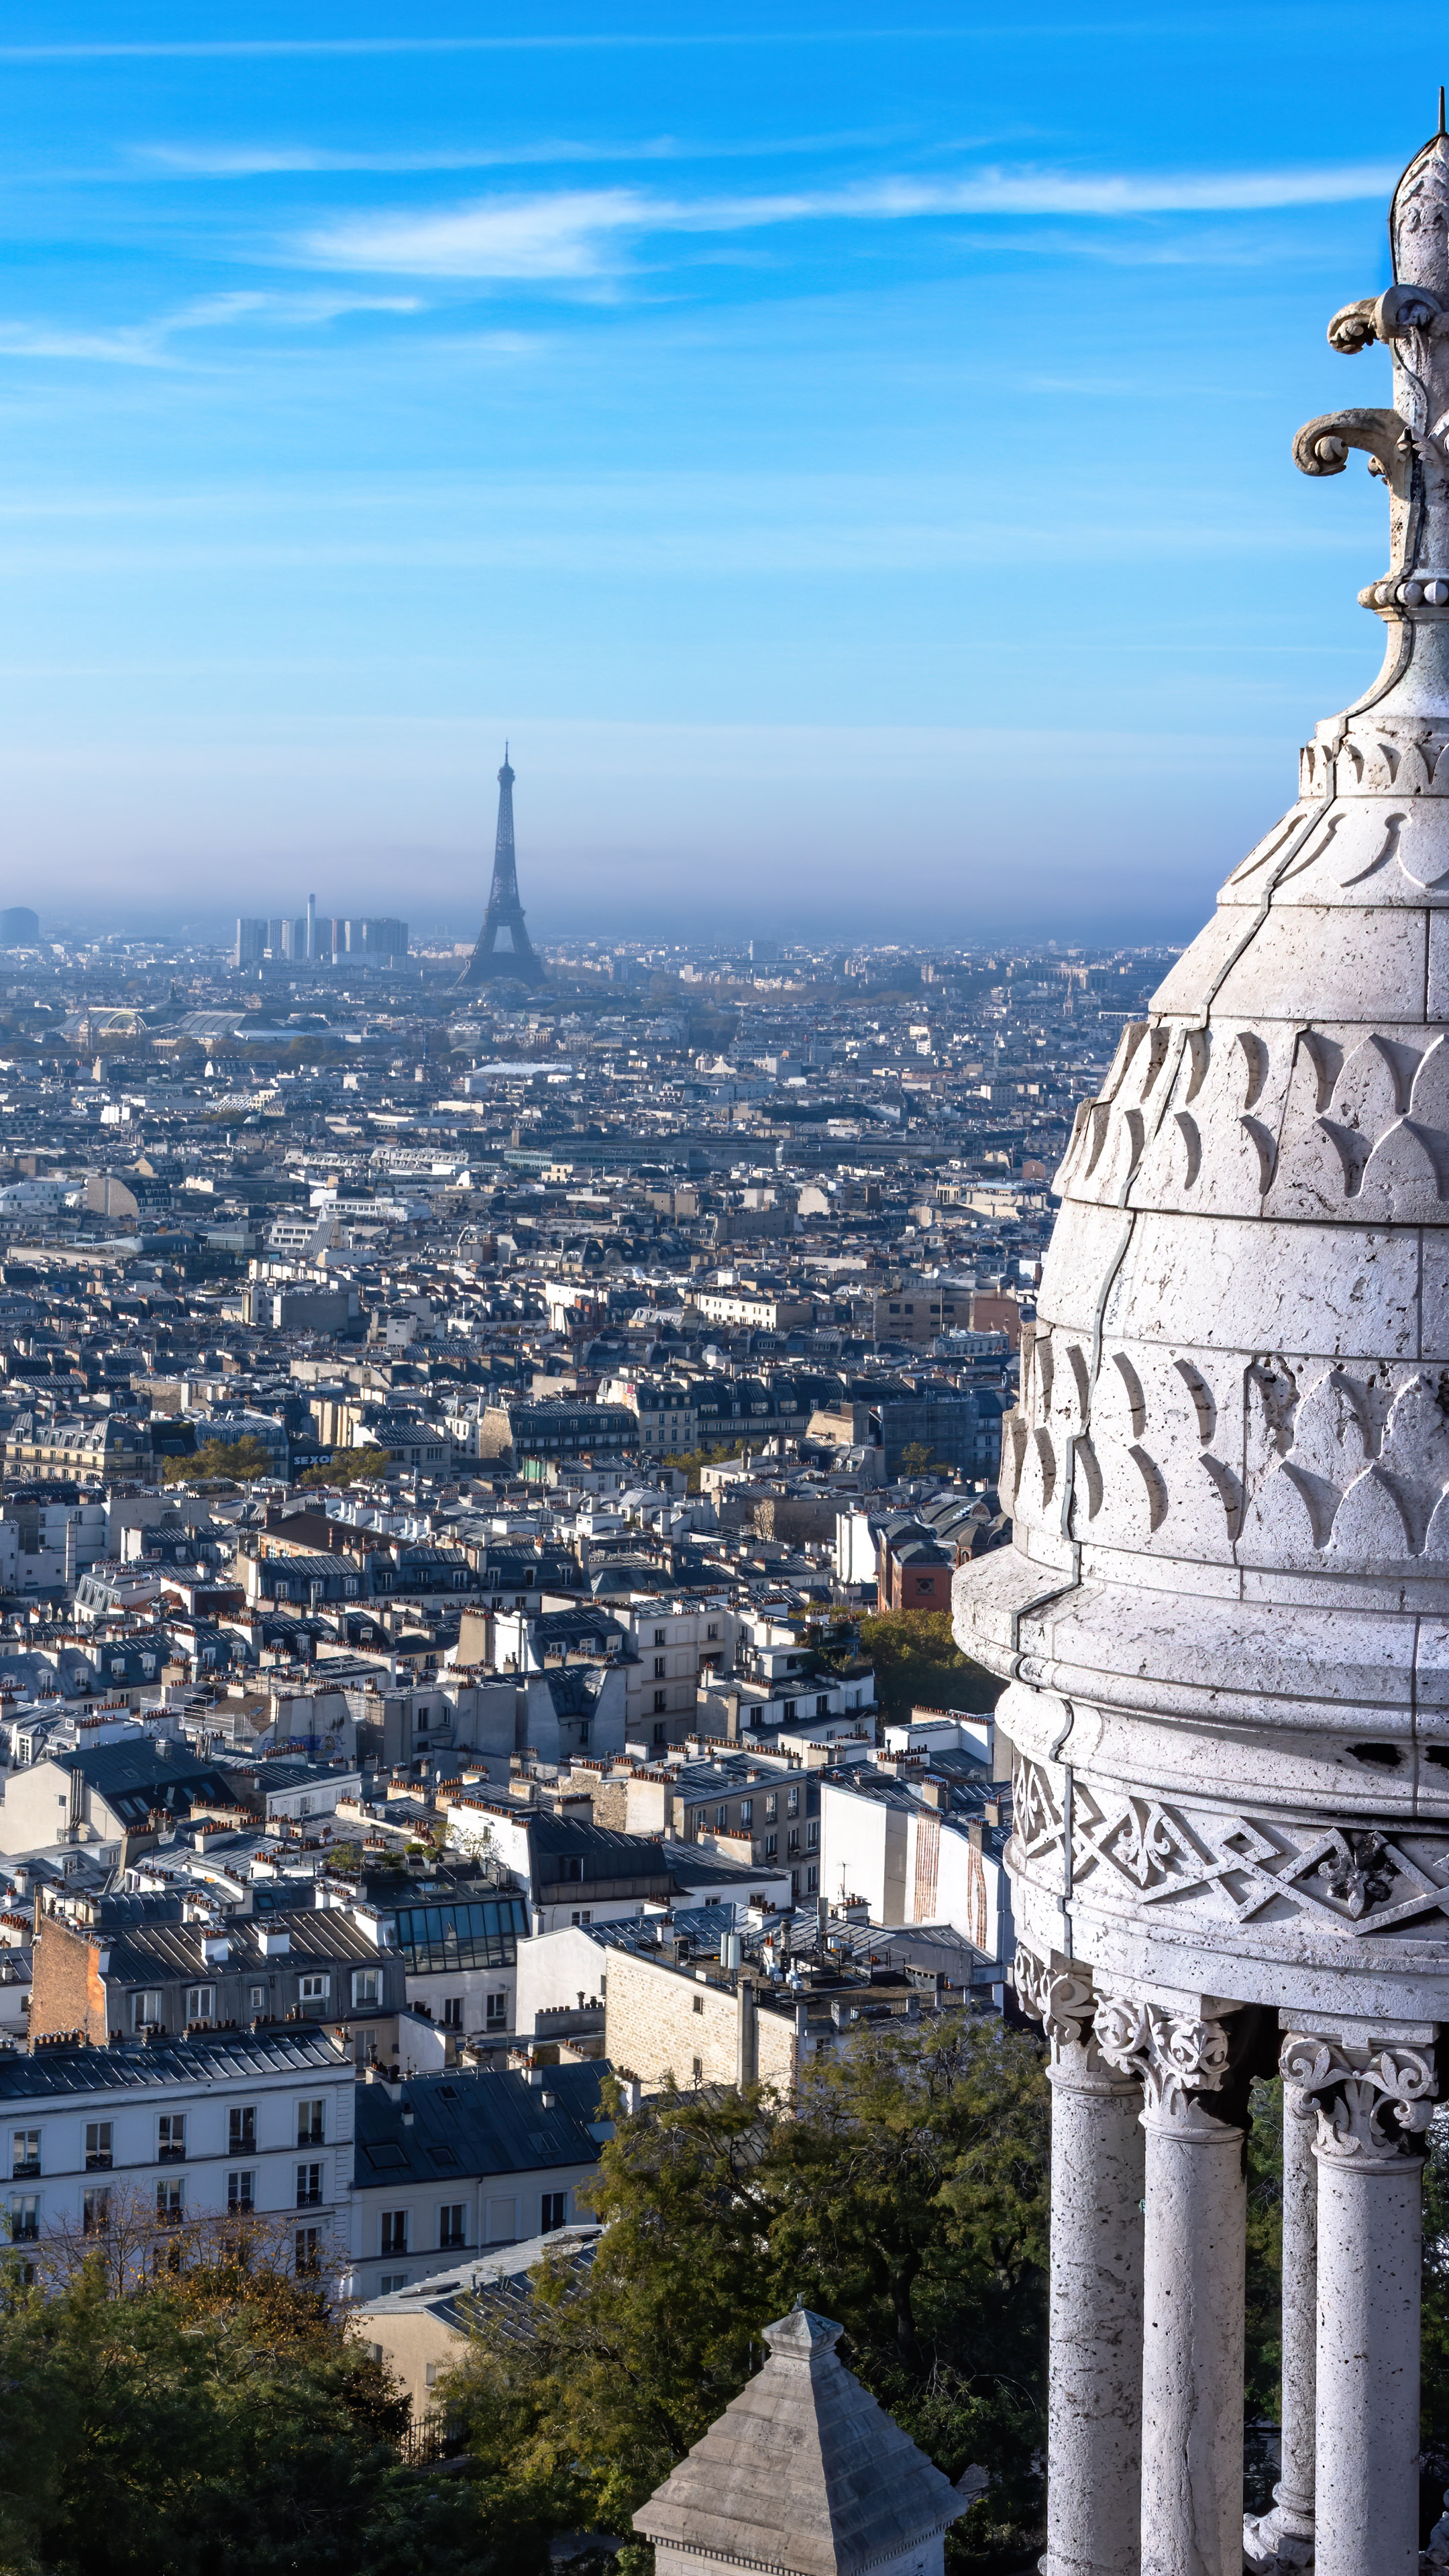 Stunning cityscape wallpaper of Paris featuring the iconic Eiffel Tower in the background.